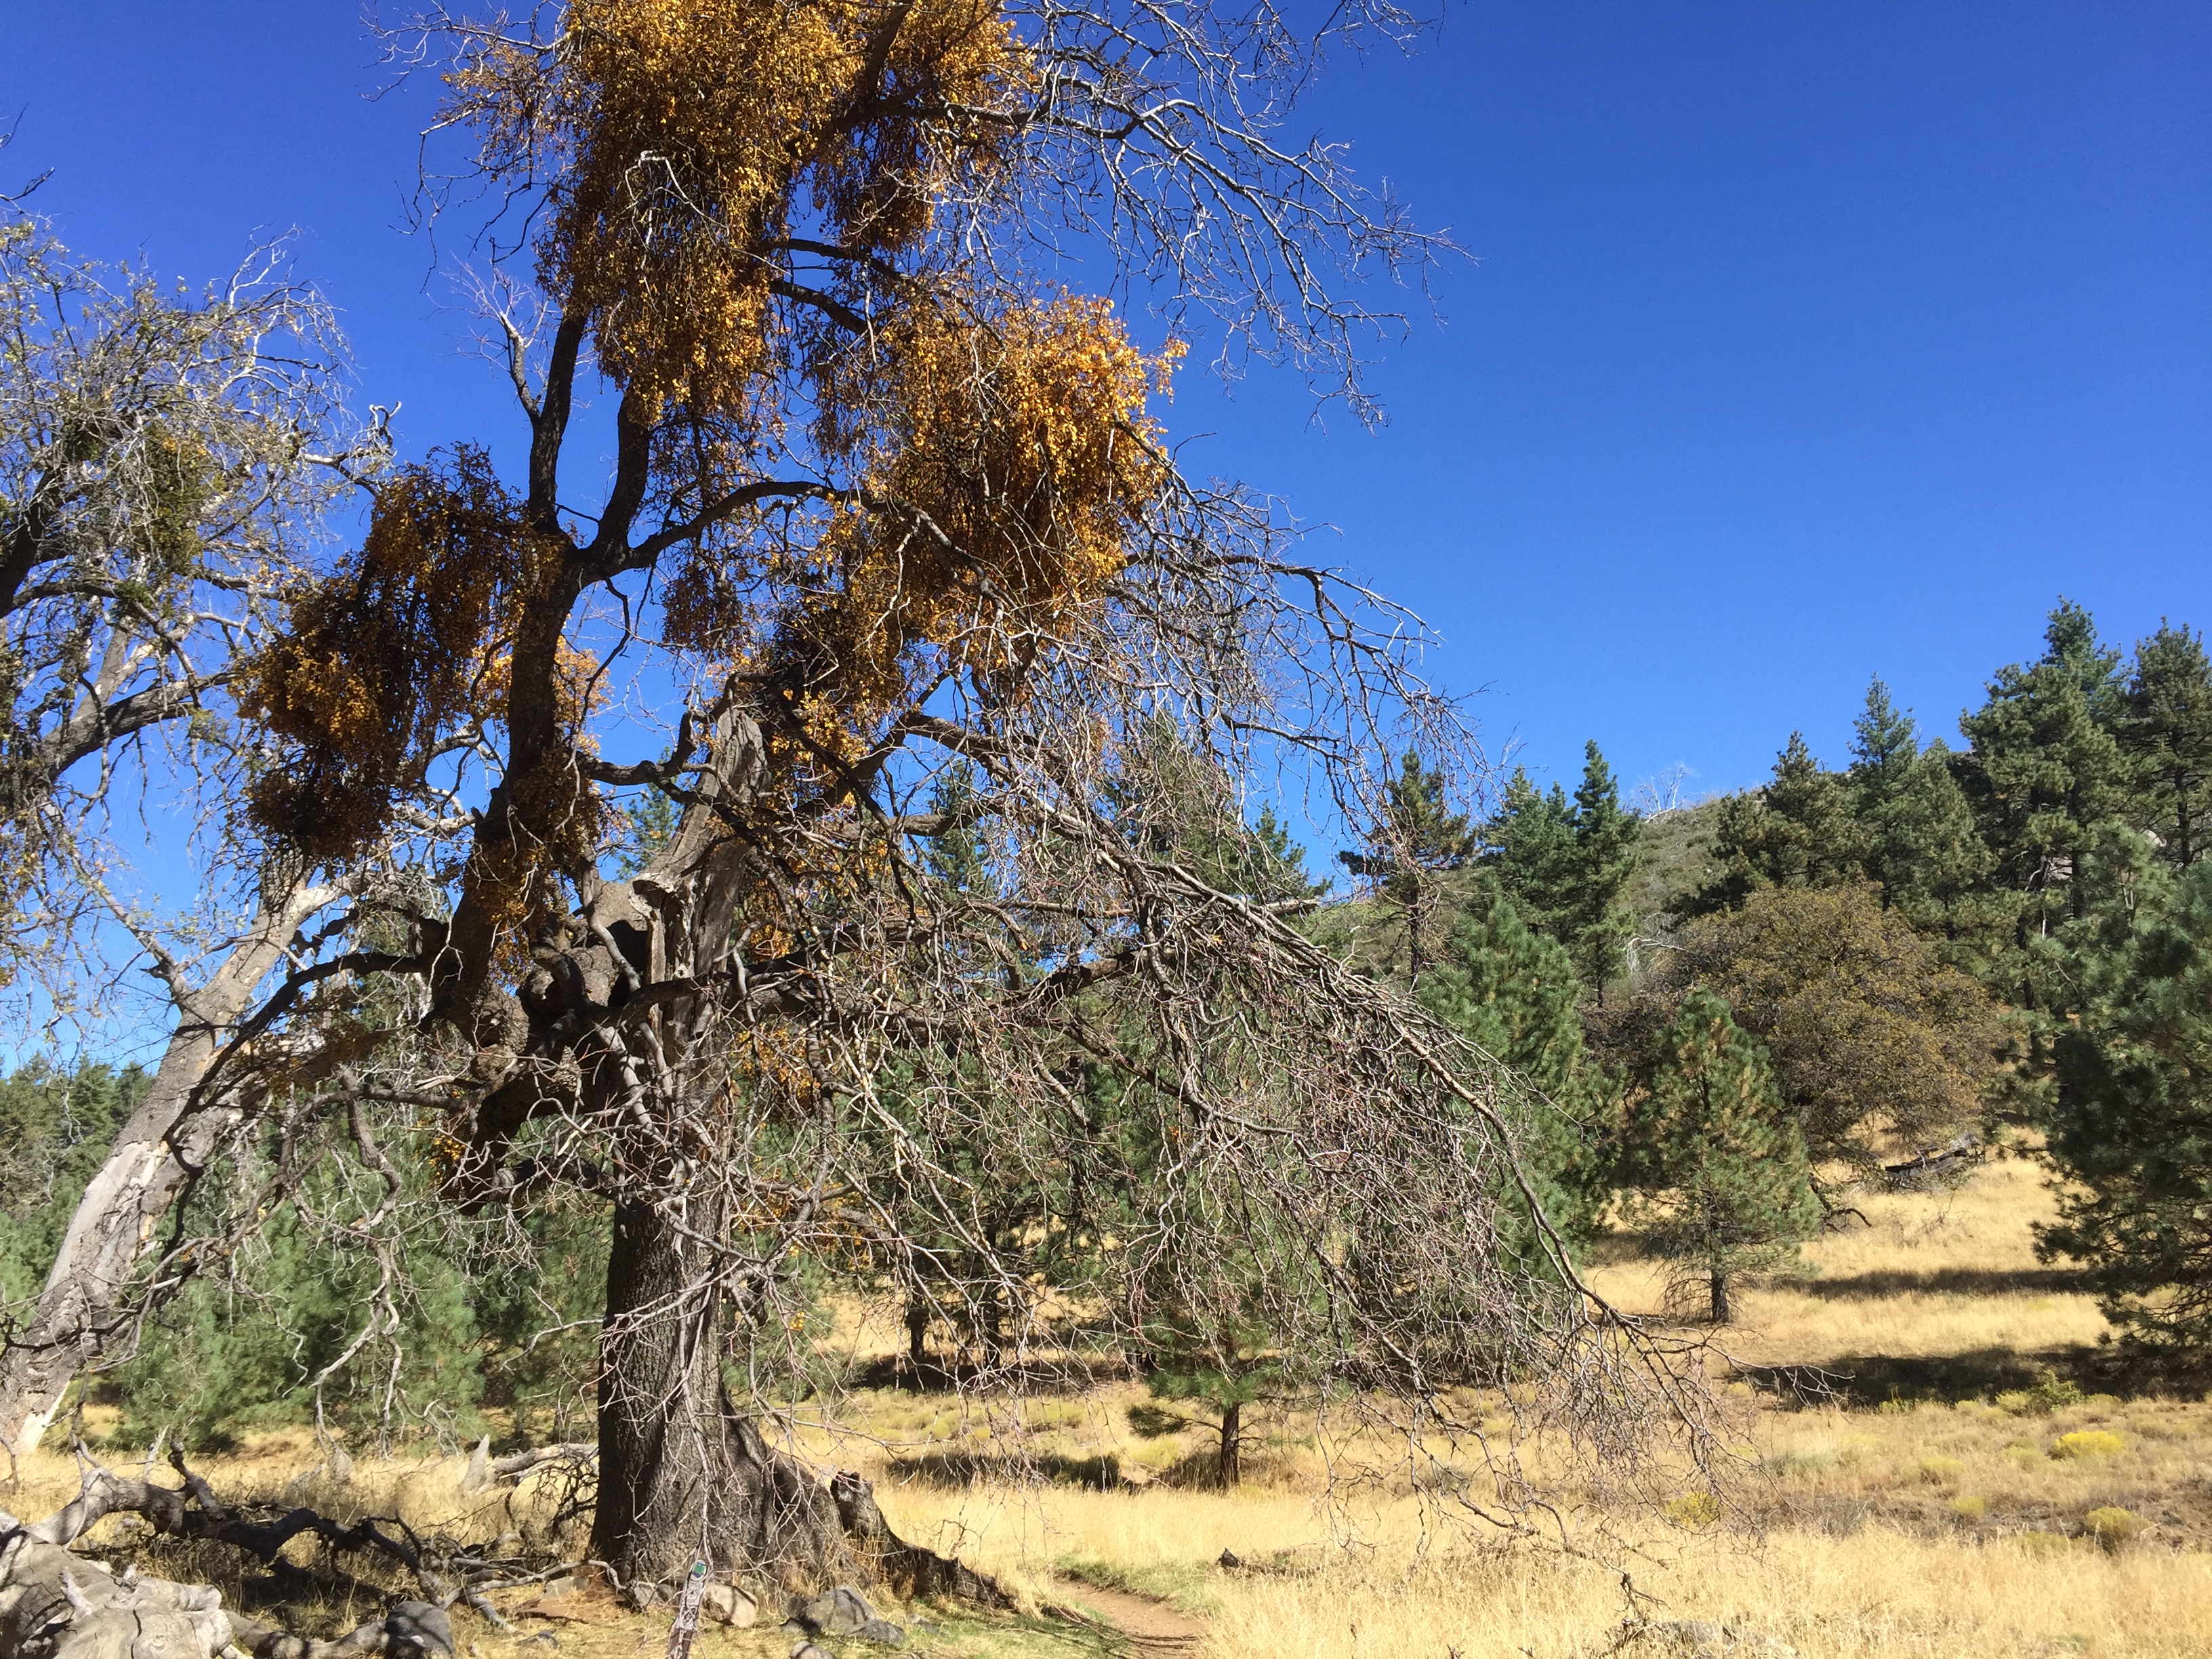 A nearly dead oak tree in the Mount Laguna area is under attack by drought and a beetle infestation.